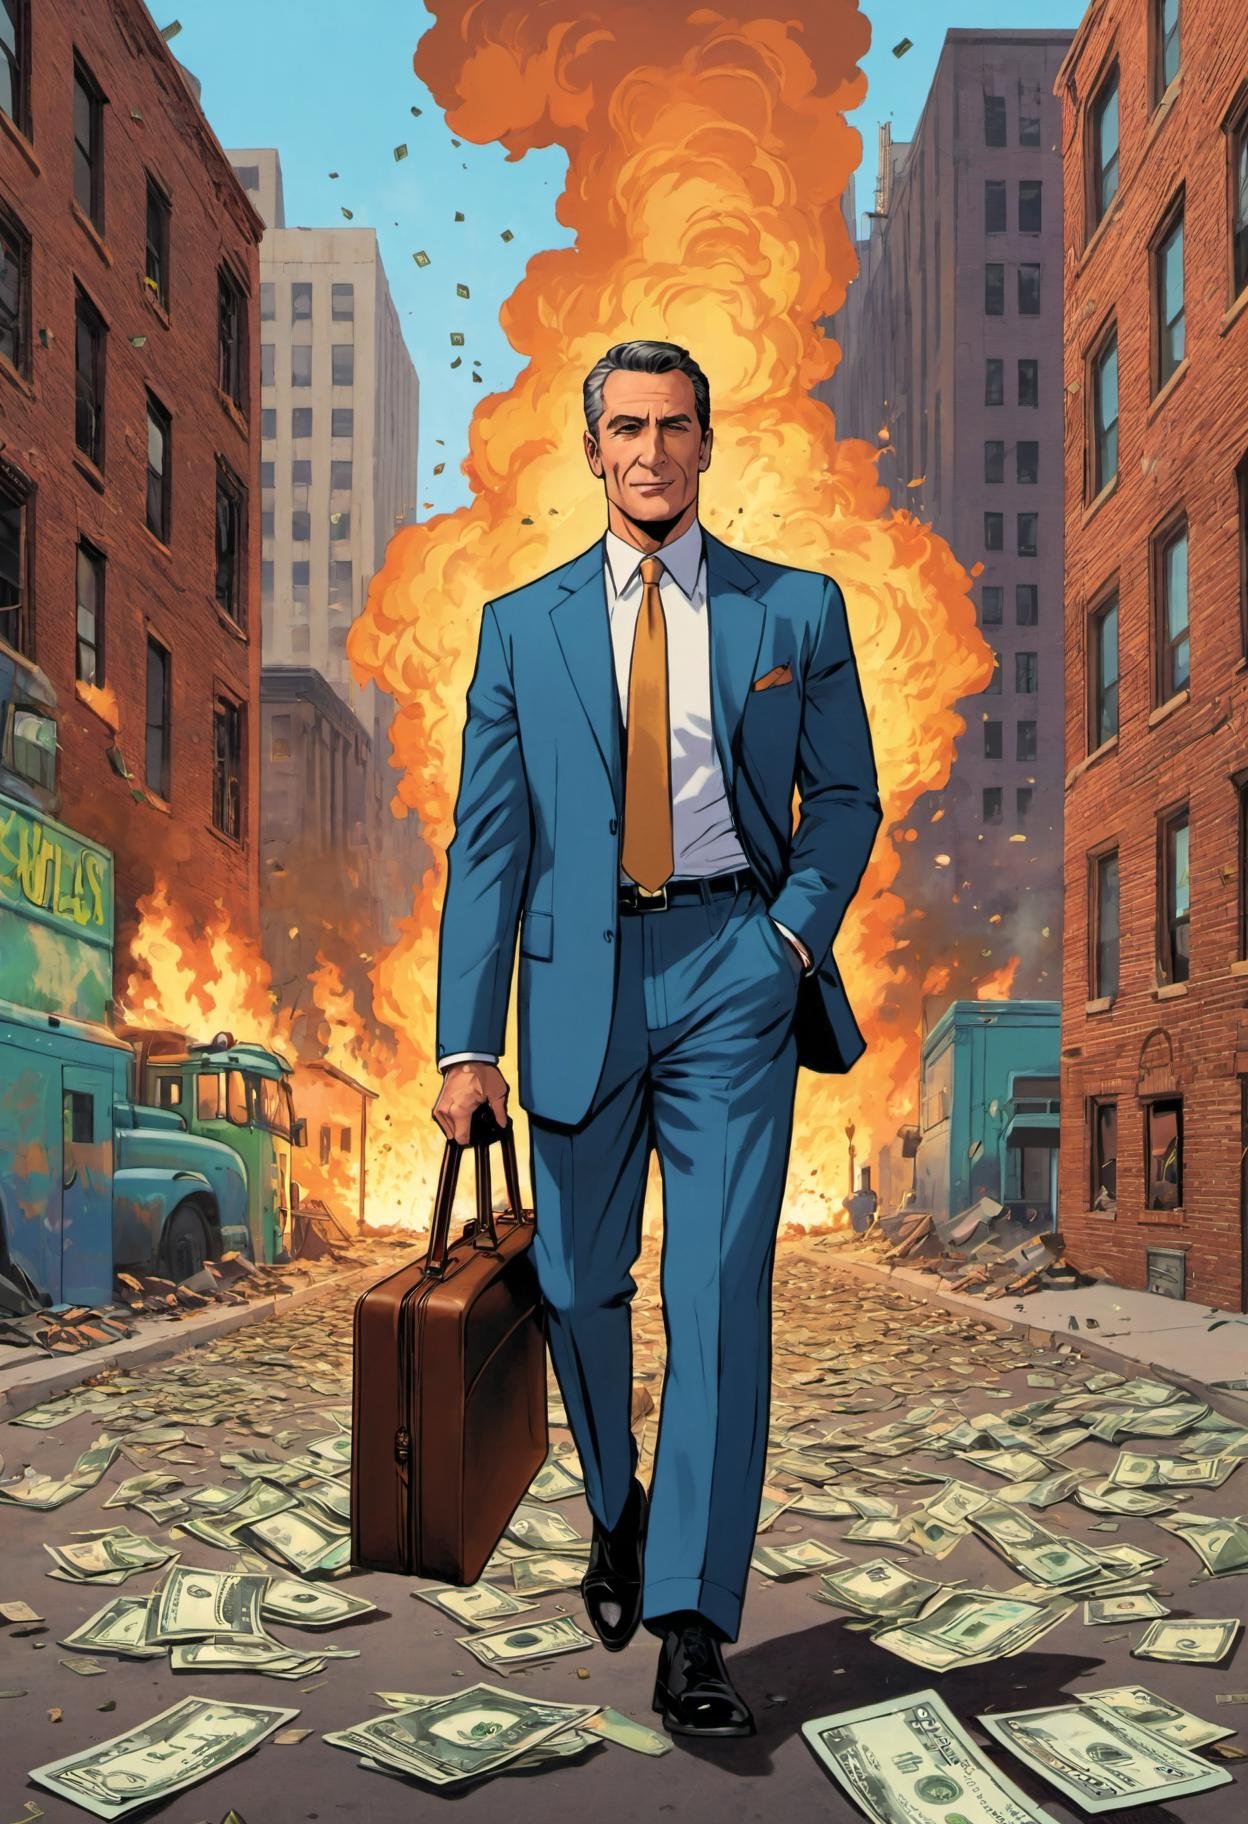 Graffiti style , art by Tom Gill, art by Fred Guardineer, art by Paul S. Newman, art by Carl Pfeufer, flat colors, cell shading, vibrant pastels,Street art, vibrant, urban, detailed, tag, mural, a prim dapper business man smugly holding a briefcase as the world burns behind him, full body shot, crumbling buildings, fire and brimstone, (cash falling from the sky, dollar bills, money everywhere:1.5), self satisfied expression, smug, selfish, wailing masses fill the street of a burning city, (apocalypse, total destruction:1.4)